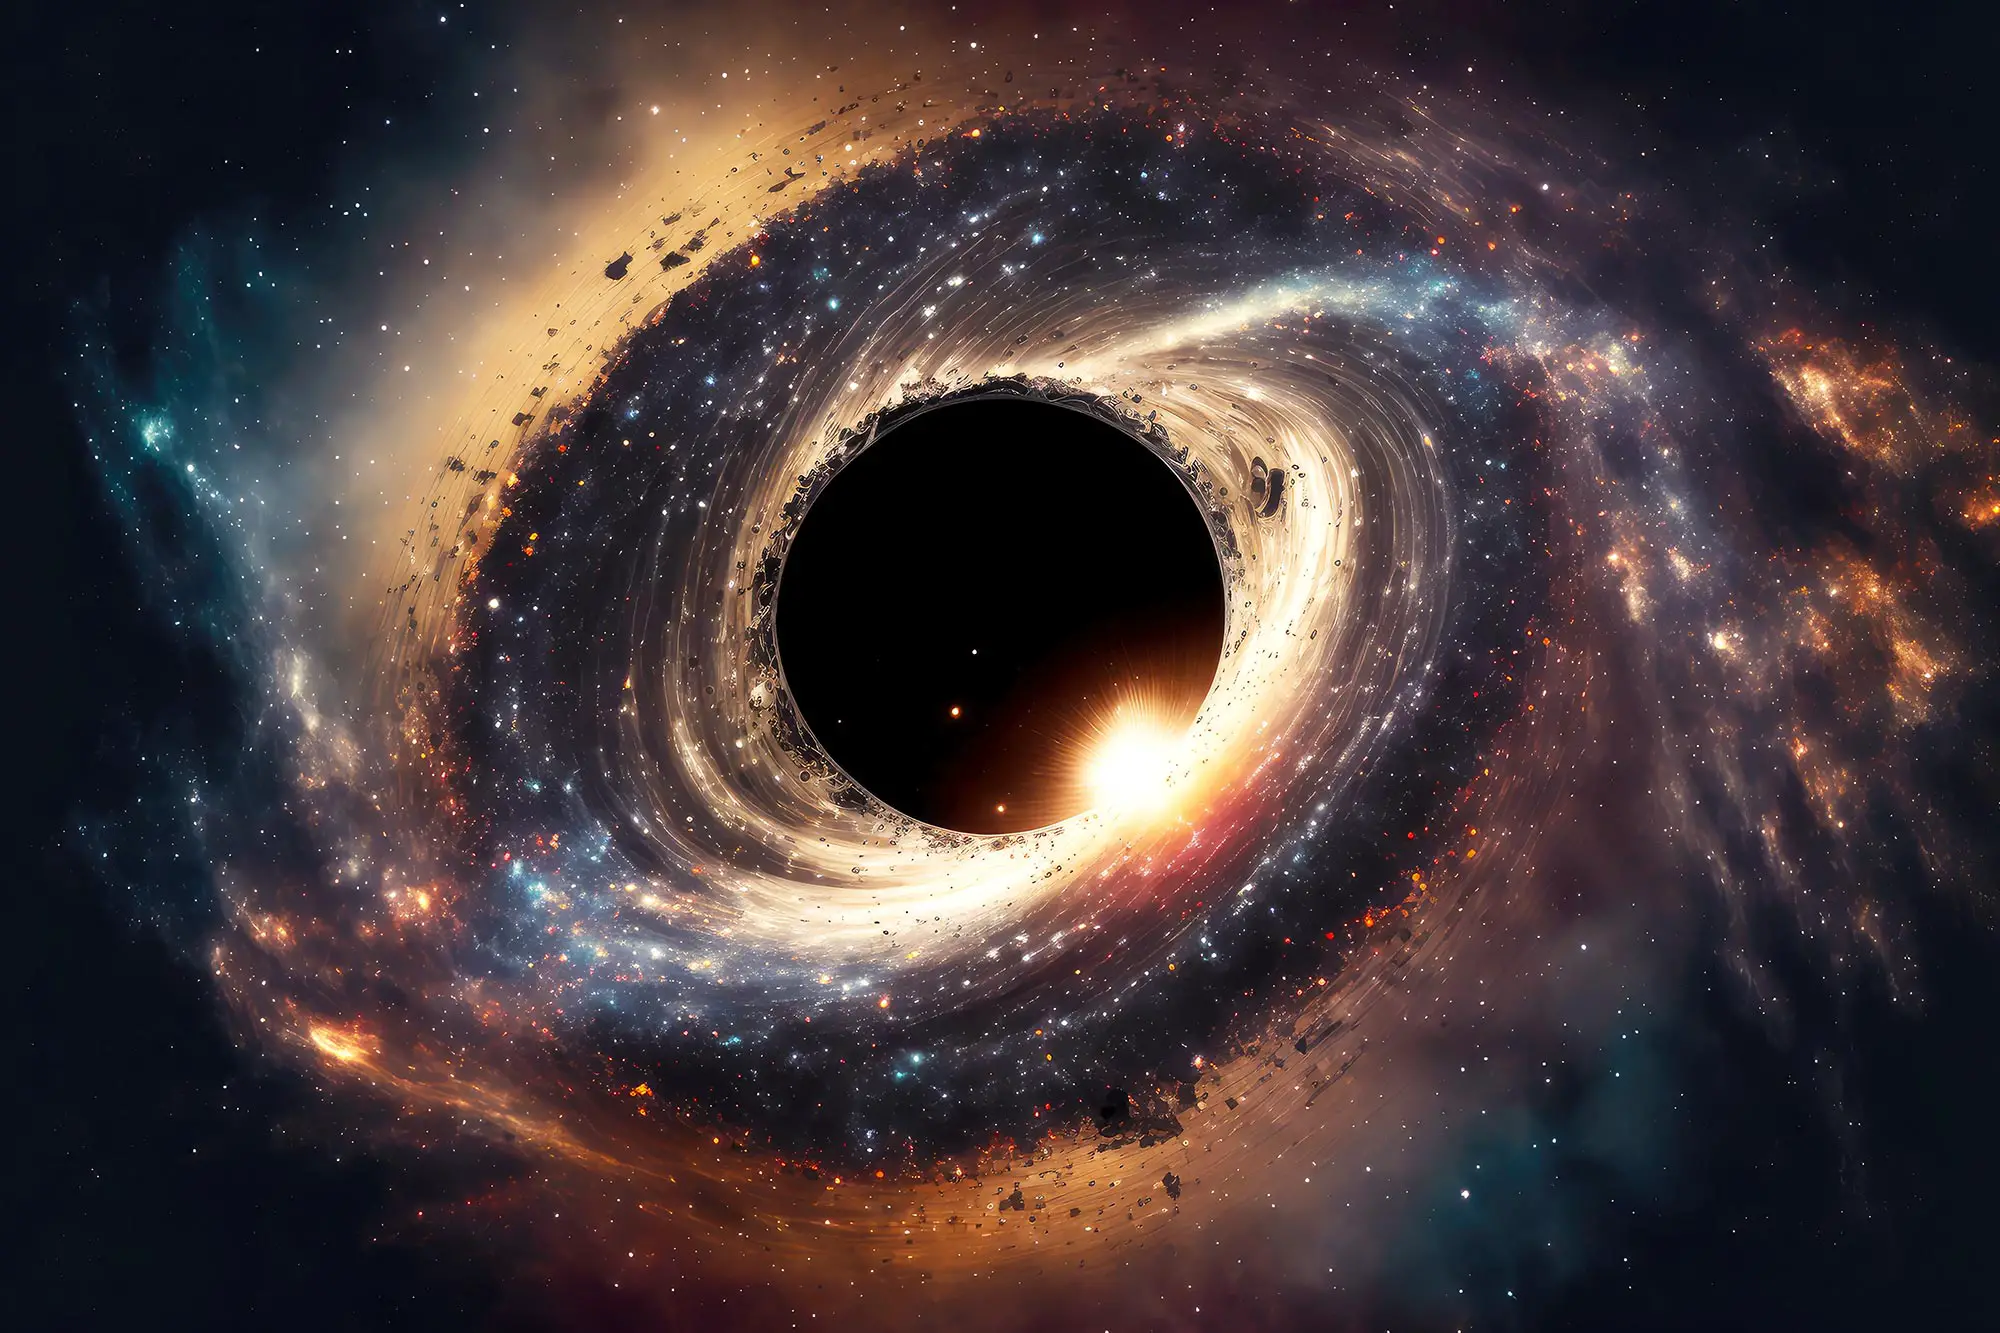 Study suggests black holes lurk only 150 light-years from Earth, challenging astronomical wisdom 